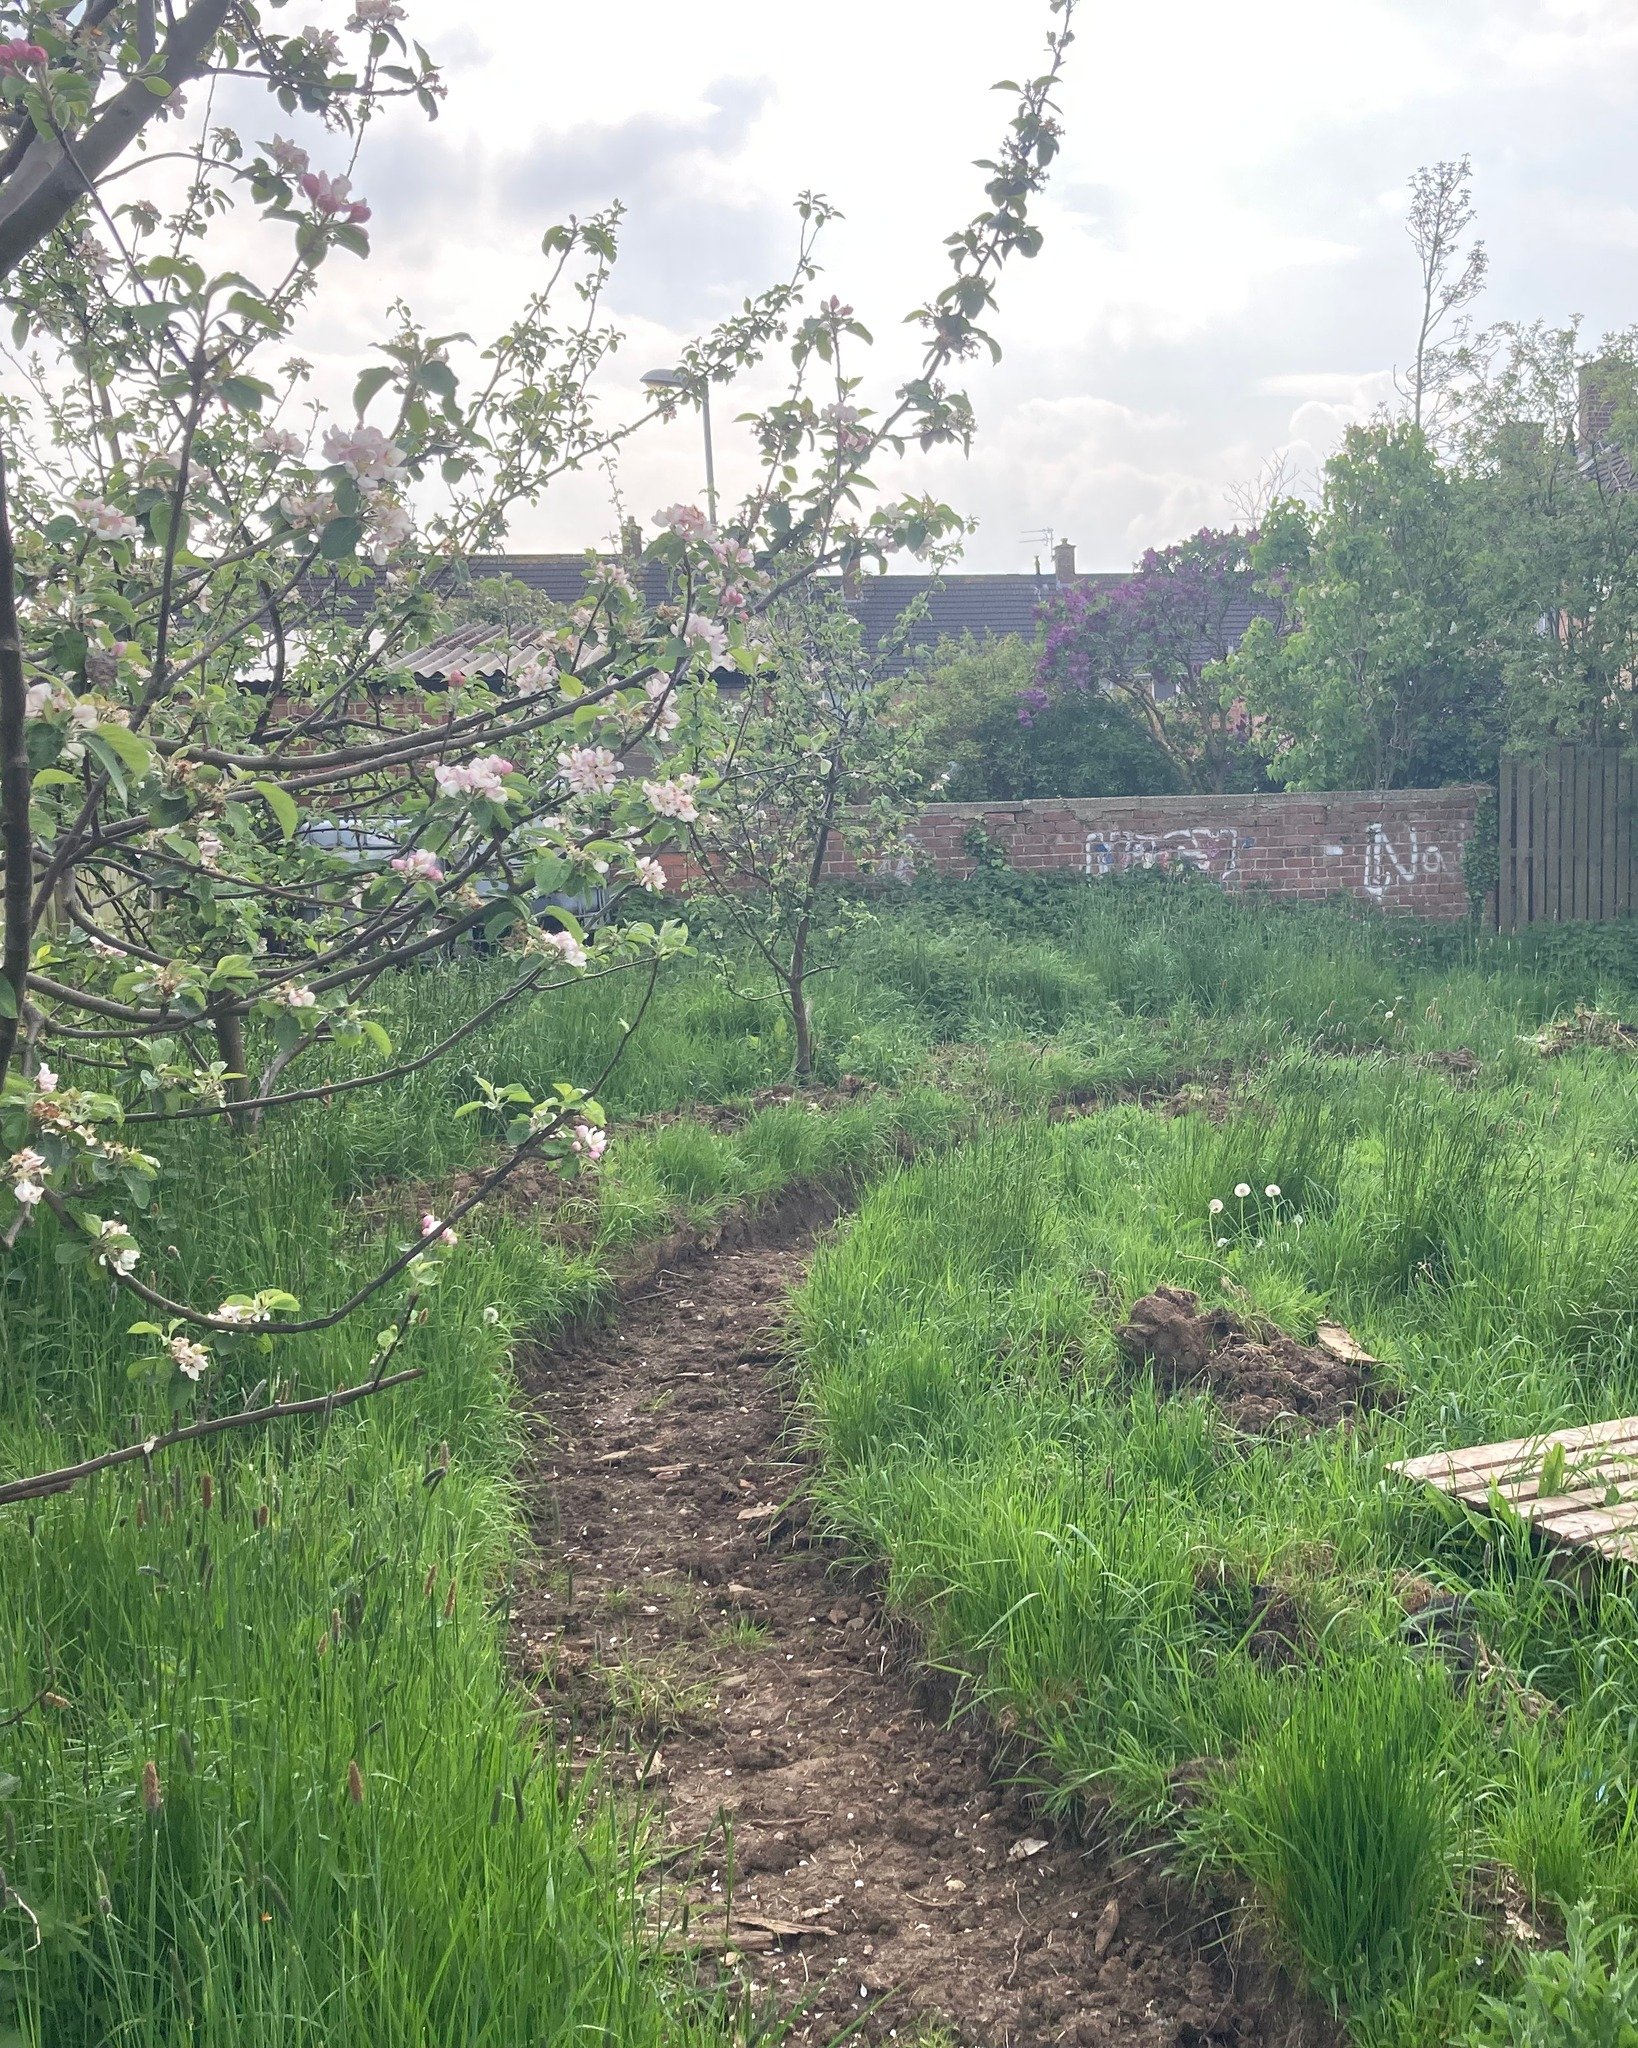 This Sunday is our #ServeTeesside Project. We're working on the Community Garden in Easterside in partnership with the @healthvillagecic. We will be clearing, trimming, litter picking, building, making, shifting, and planting. Come and join us. Kids 